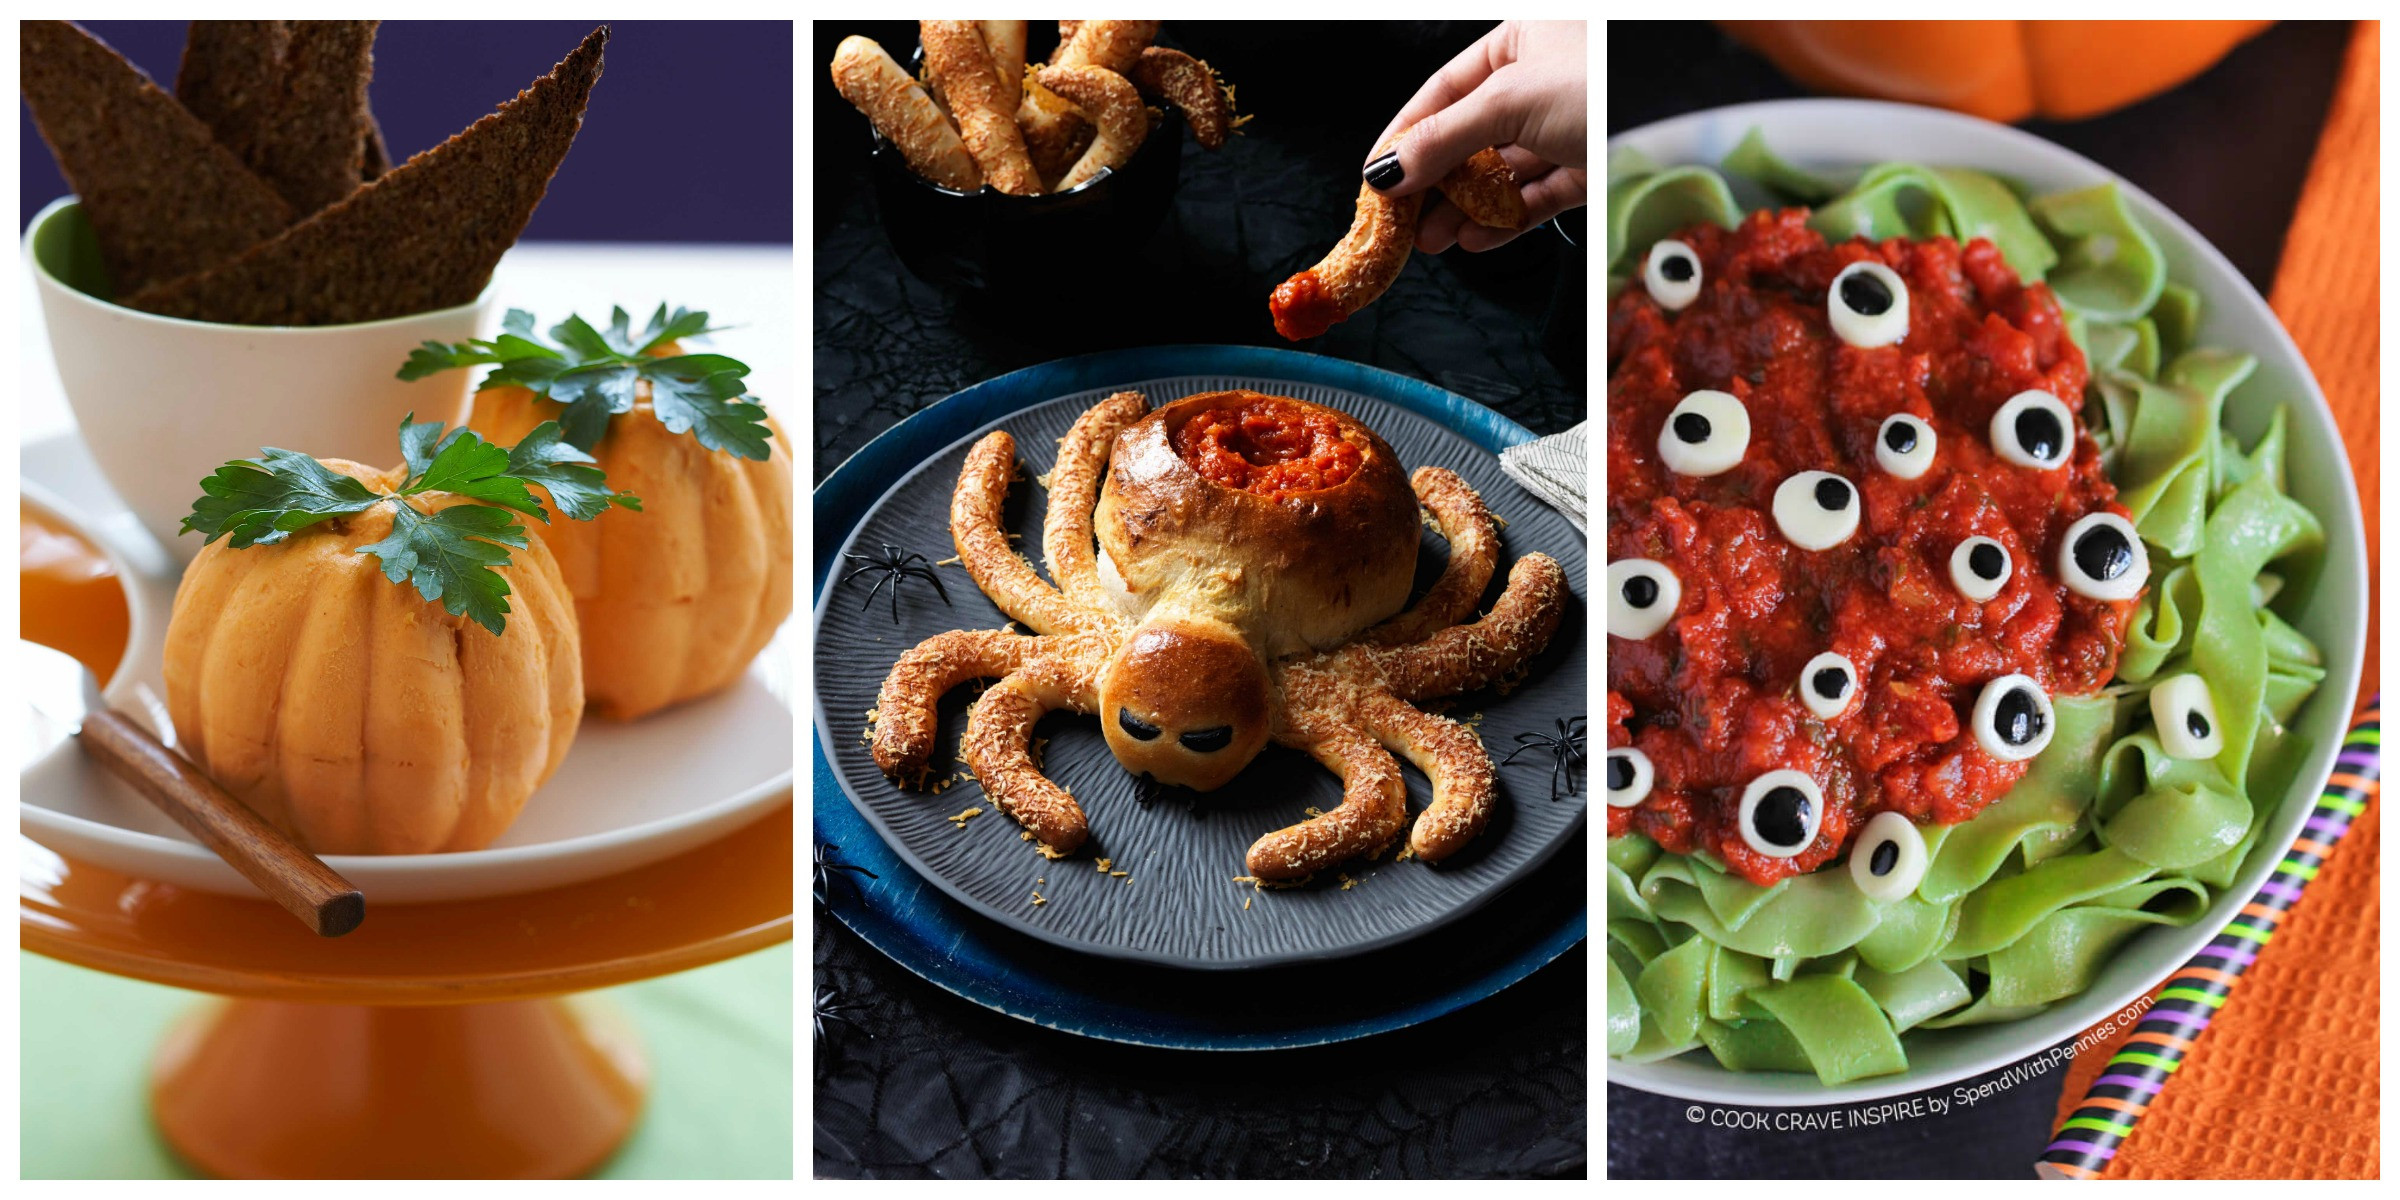 Spooky Halloween Dinners
 25 Spooky Halloween Dinner Ideas Best Recipes for